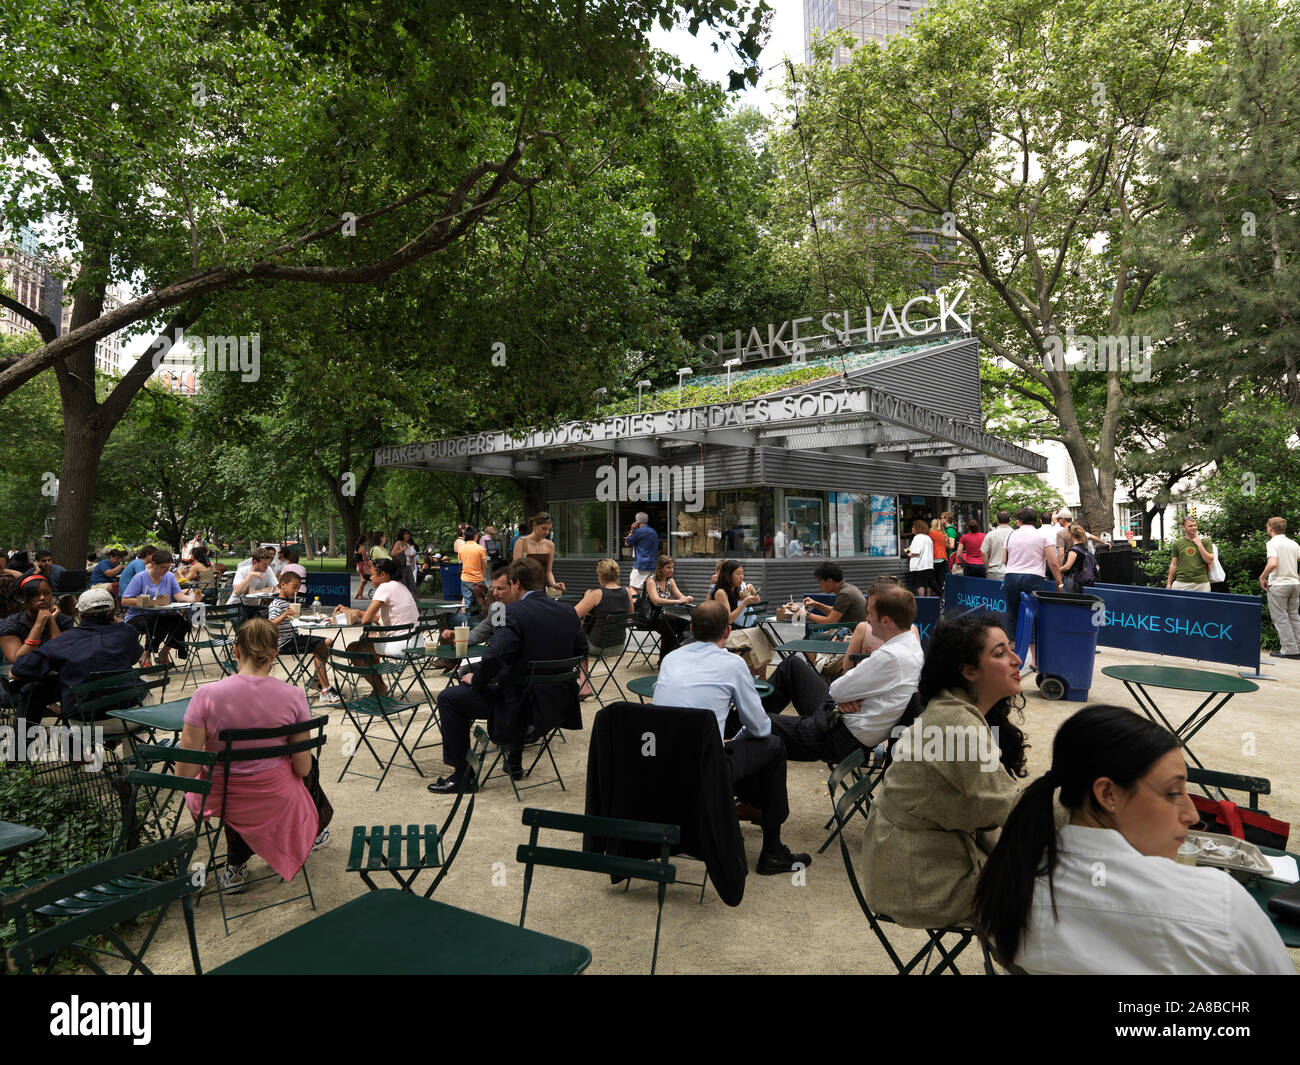 Group of people sitting in a restaurant, Shake Shack, Madison Square, intersection of 24th street and Madison Avenue, Manhattan, New York City, New York State, USA Stock Photo